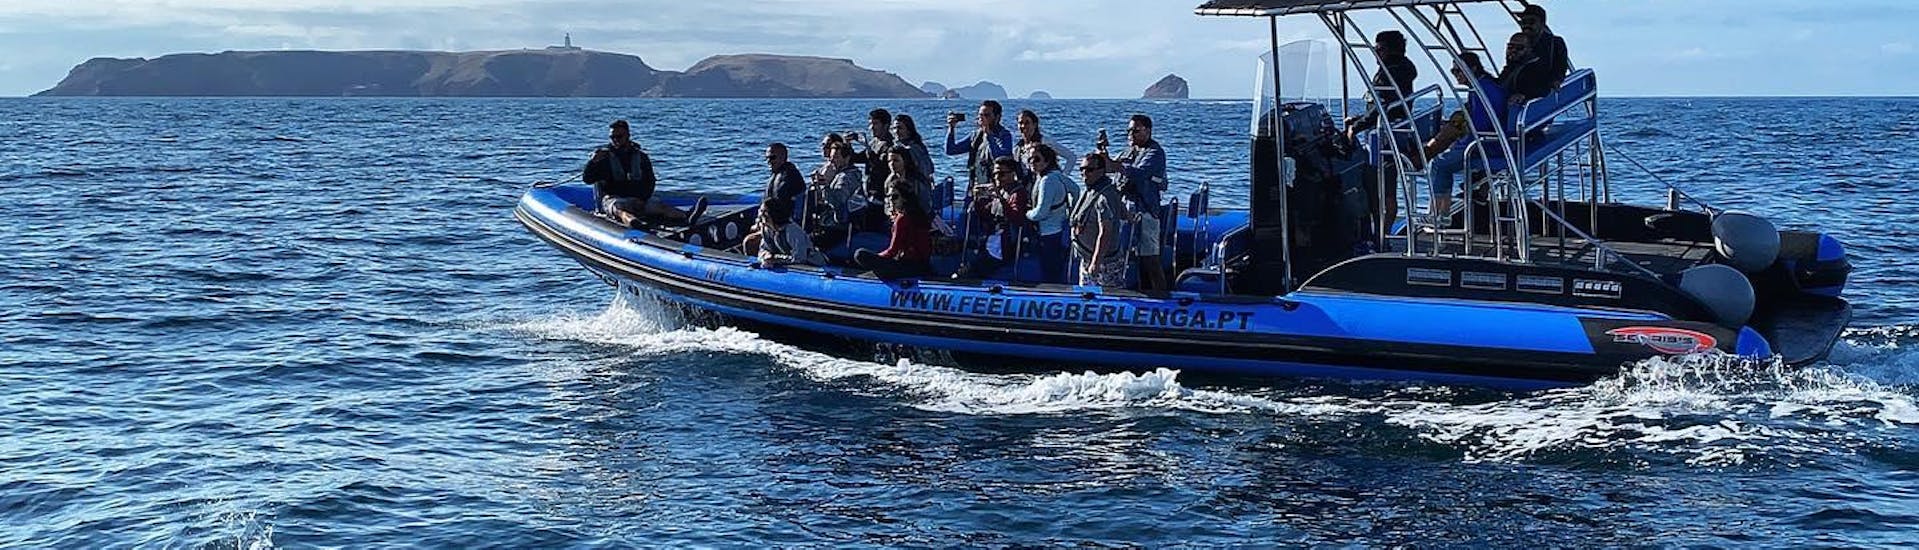 Boat Trip to the Berlengas with Discovery Scuba Diving with Feeling Berlenga - Hero image